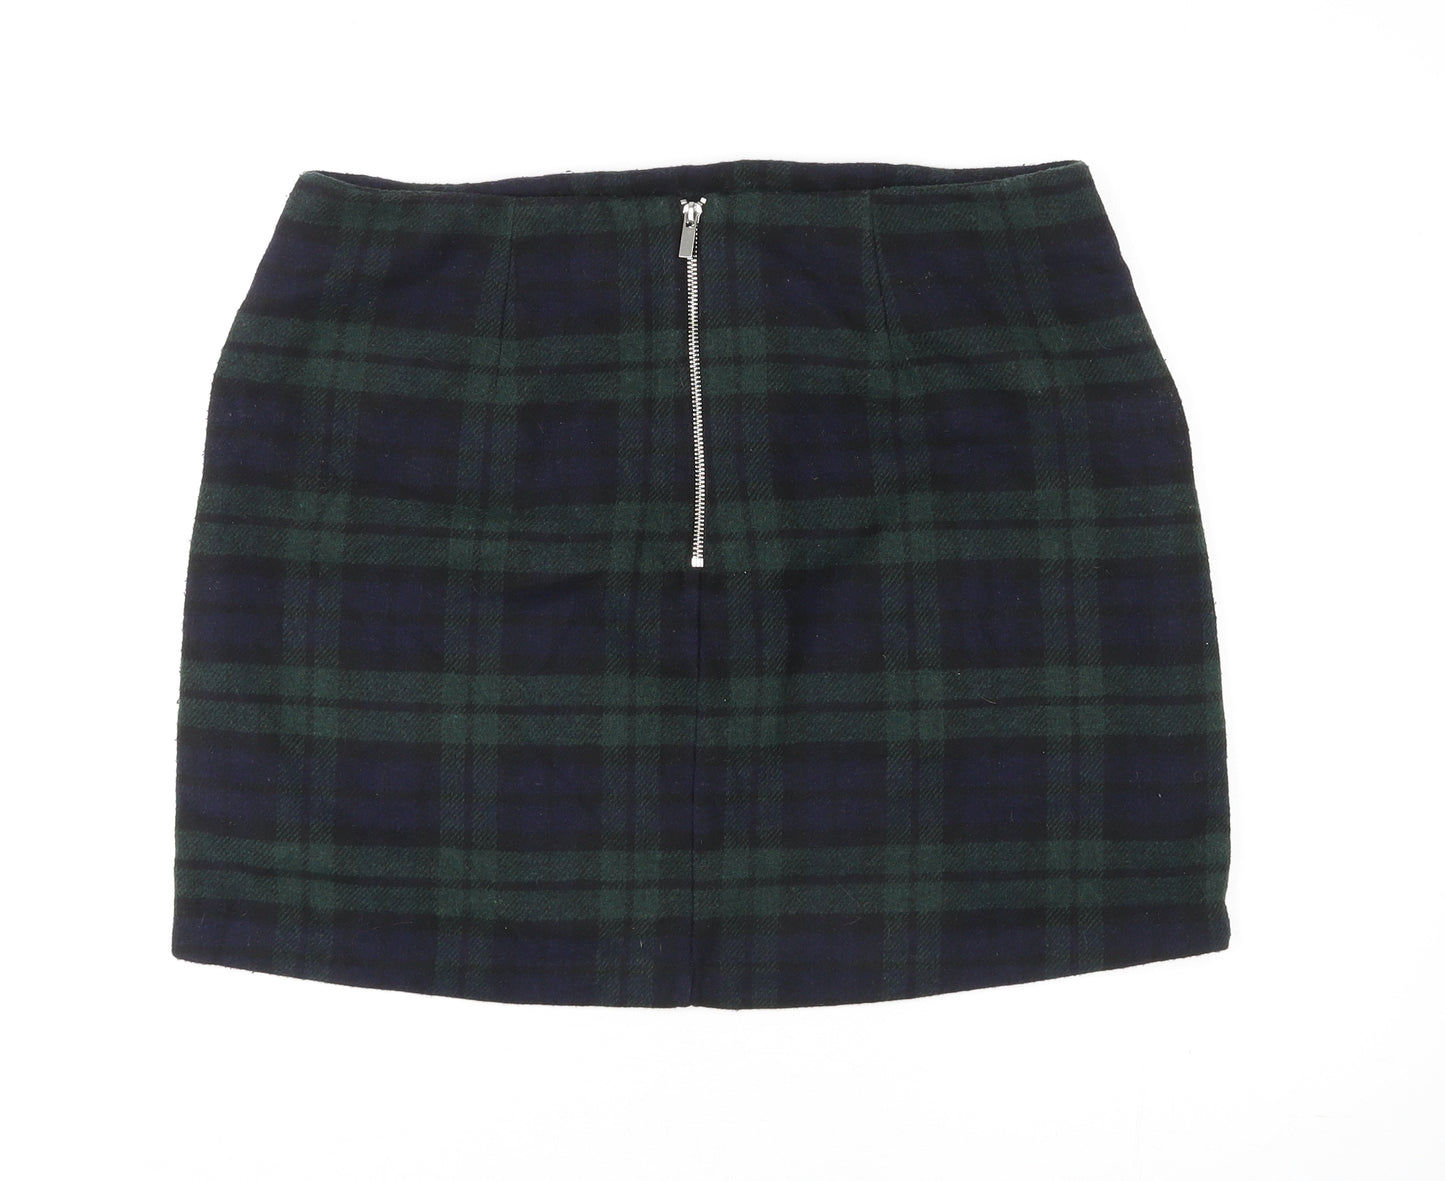 New Look Womens Multicoloured Plaid Polyester A-Line Skirt Size 16 Zip